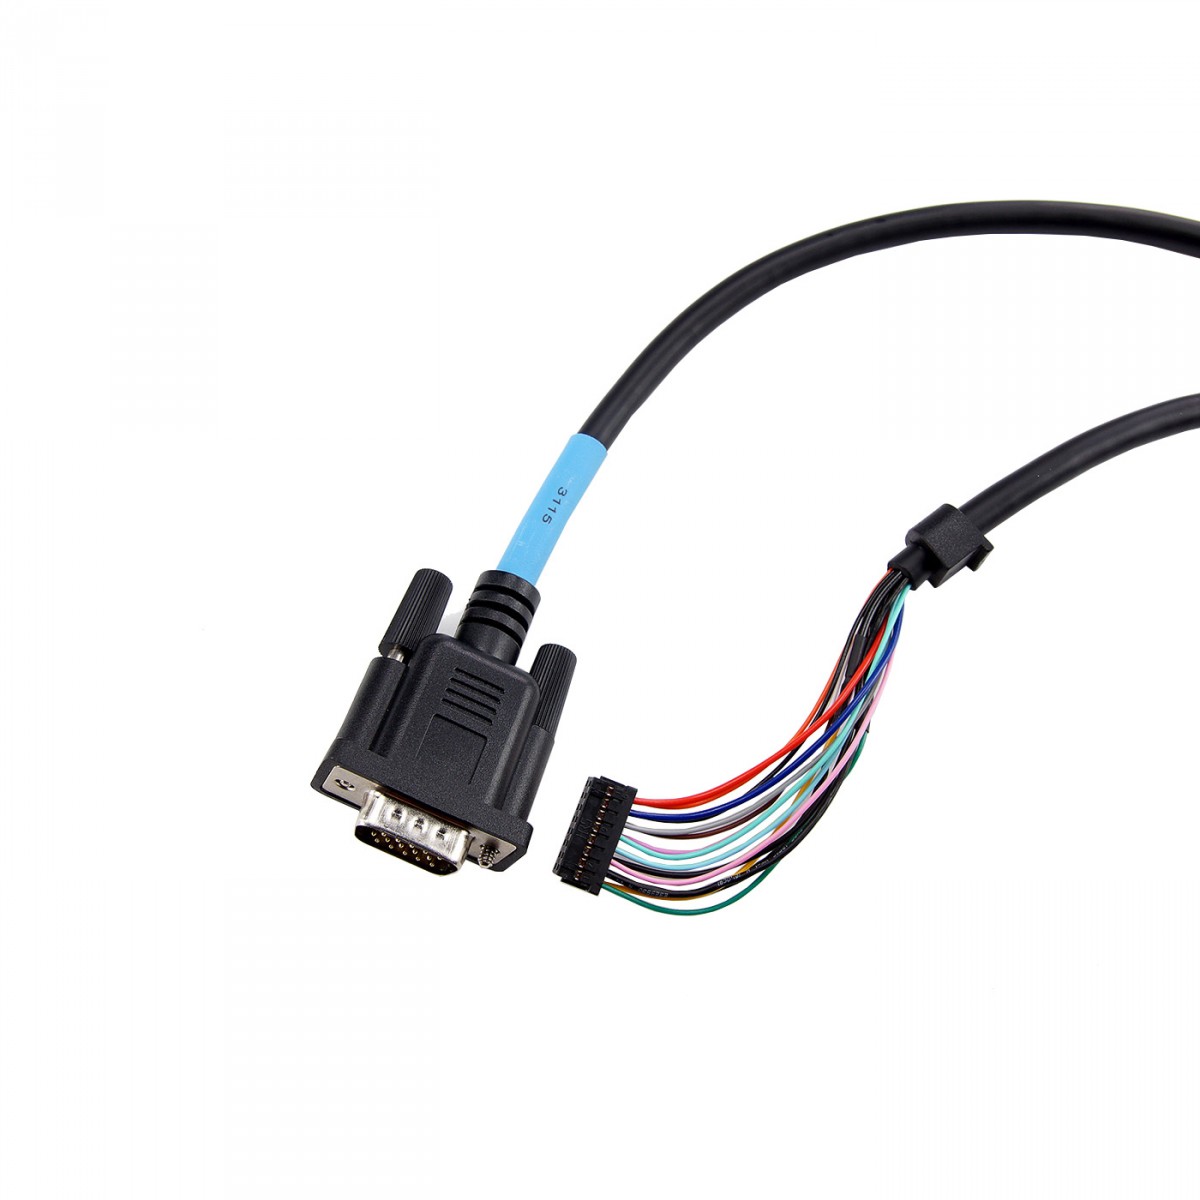 SEPURA connection cable 3m for remote control 065875 300-00664